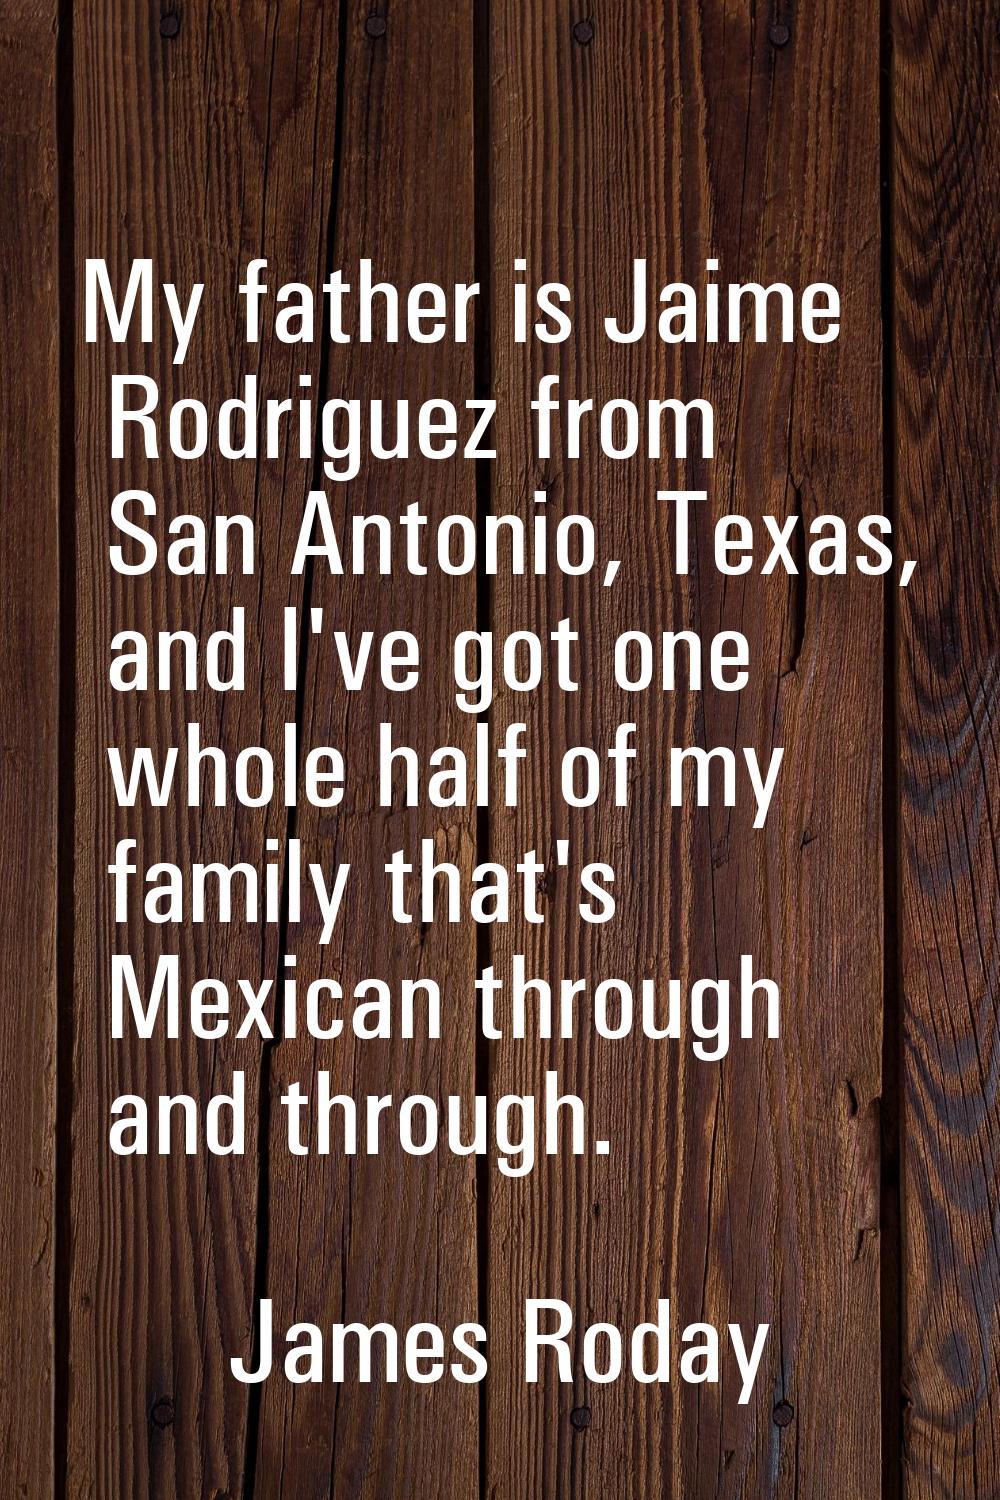 My father is Jaime Rodriguez from San Antonio, Texas, and I've got one whole half of my family that